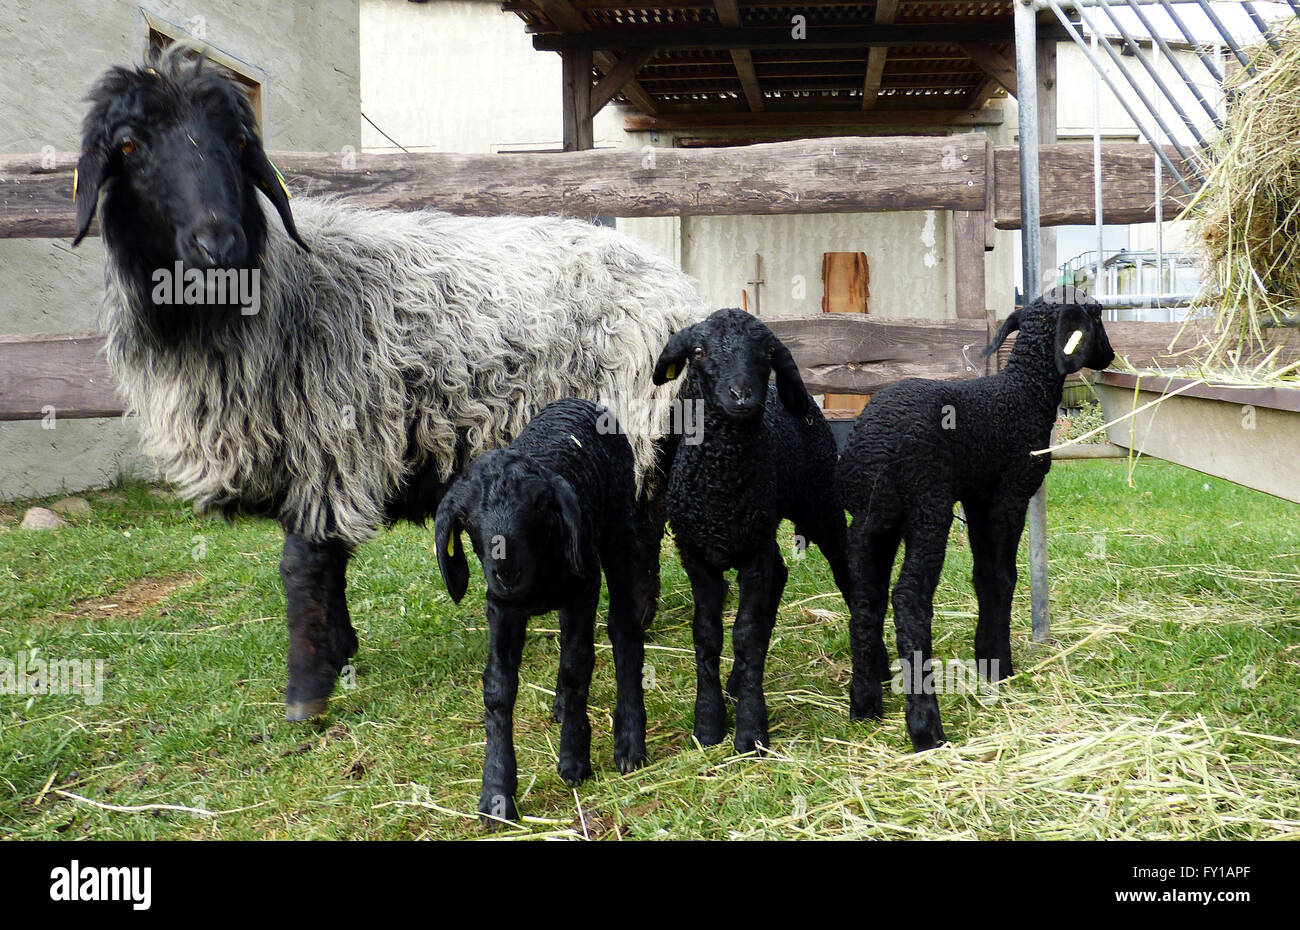 A mother sheep of the breed Karakul, which is highly endangered and threatened with extinction in Germany, stands with lambs at the Gaudian sheep farm in Gardelegen, Germany, 06 April 2016. Because of their unique curls, the lambs had once been highly coveted for the fur industry. There are currently seven Karakul sites in Germany with around 250 mother sheep in the population. In Halle, Germany strings are being pulled to protect the Karakul sheep. The working group of Karakul breeders is working for the State Sheep Farming Association of Saxony Anhalt. Photo: Sabrina Gorges Stock Photo